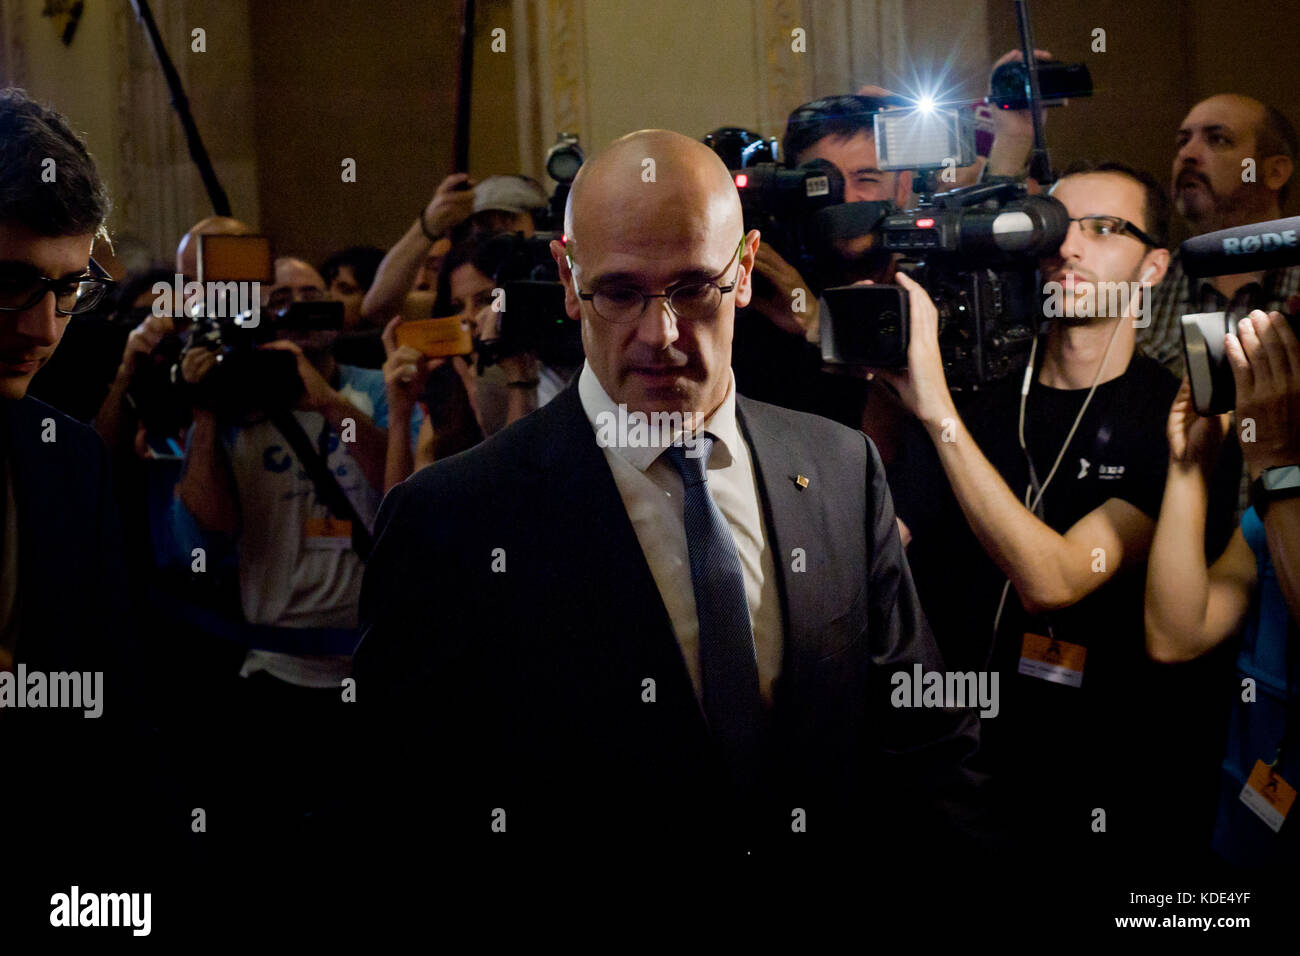 Barcelona, Catalonia, Spain. 10th Oct, 2017. Catalan Foreign Affairs chief Raul Romeva is seen at the Catalonian Parliament hours prior to the debate on independence referendum results. Credit: Jordi Boixareu/ZUMA Wire/Alamy Live News Stock Photo